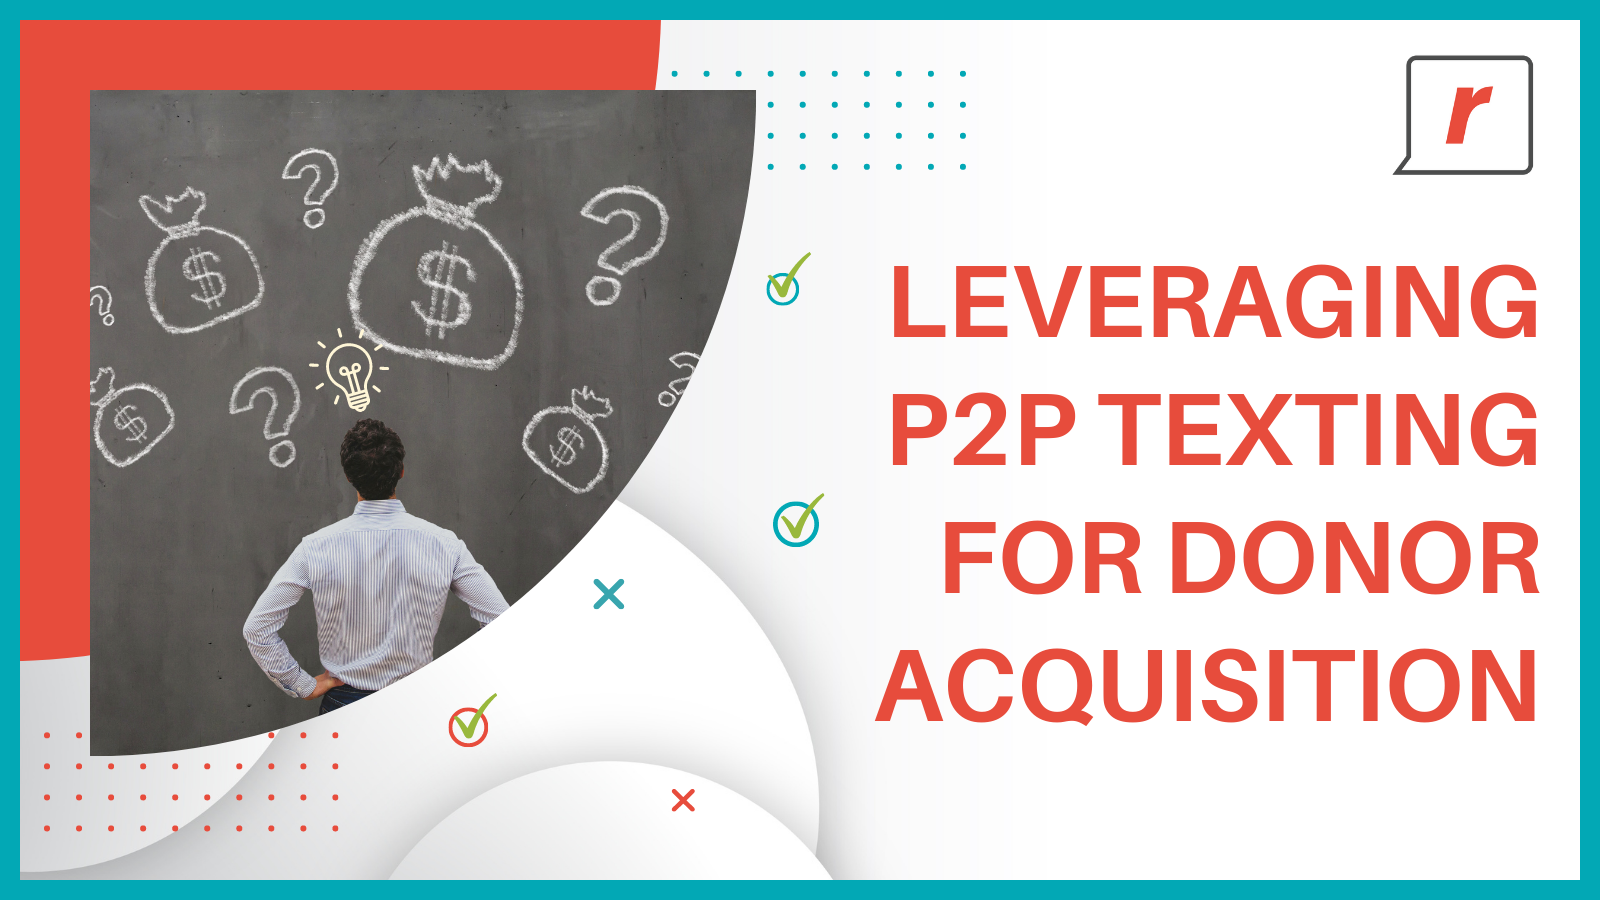 How to leverage P2P Texting for Campaign Donor Acquisition